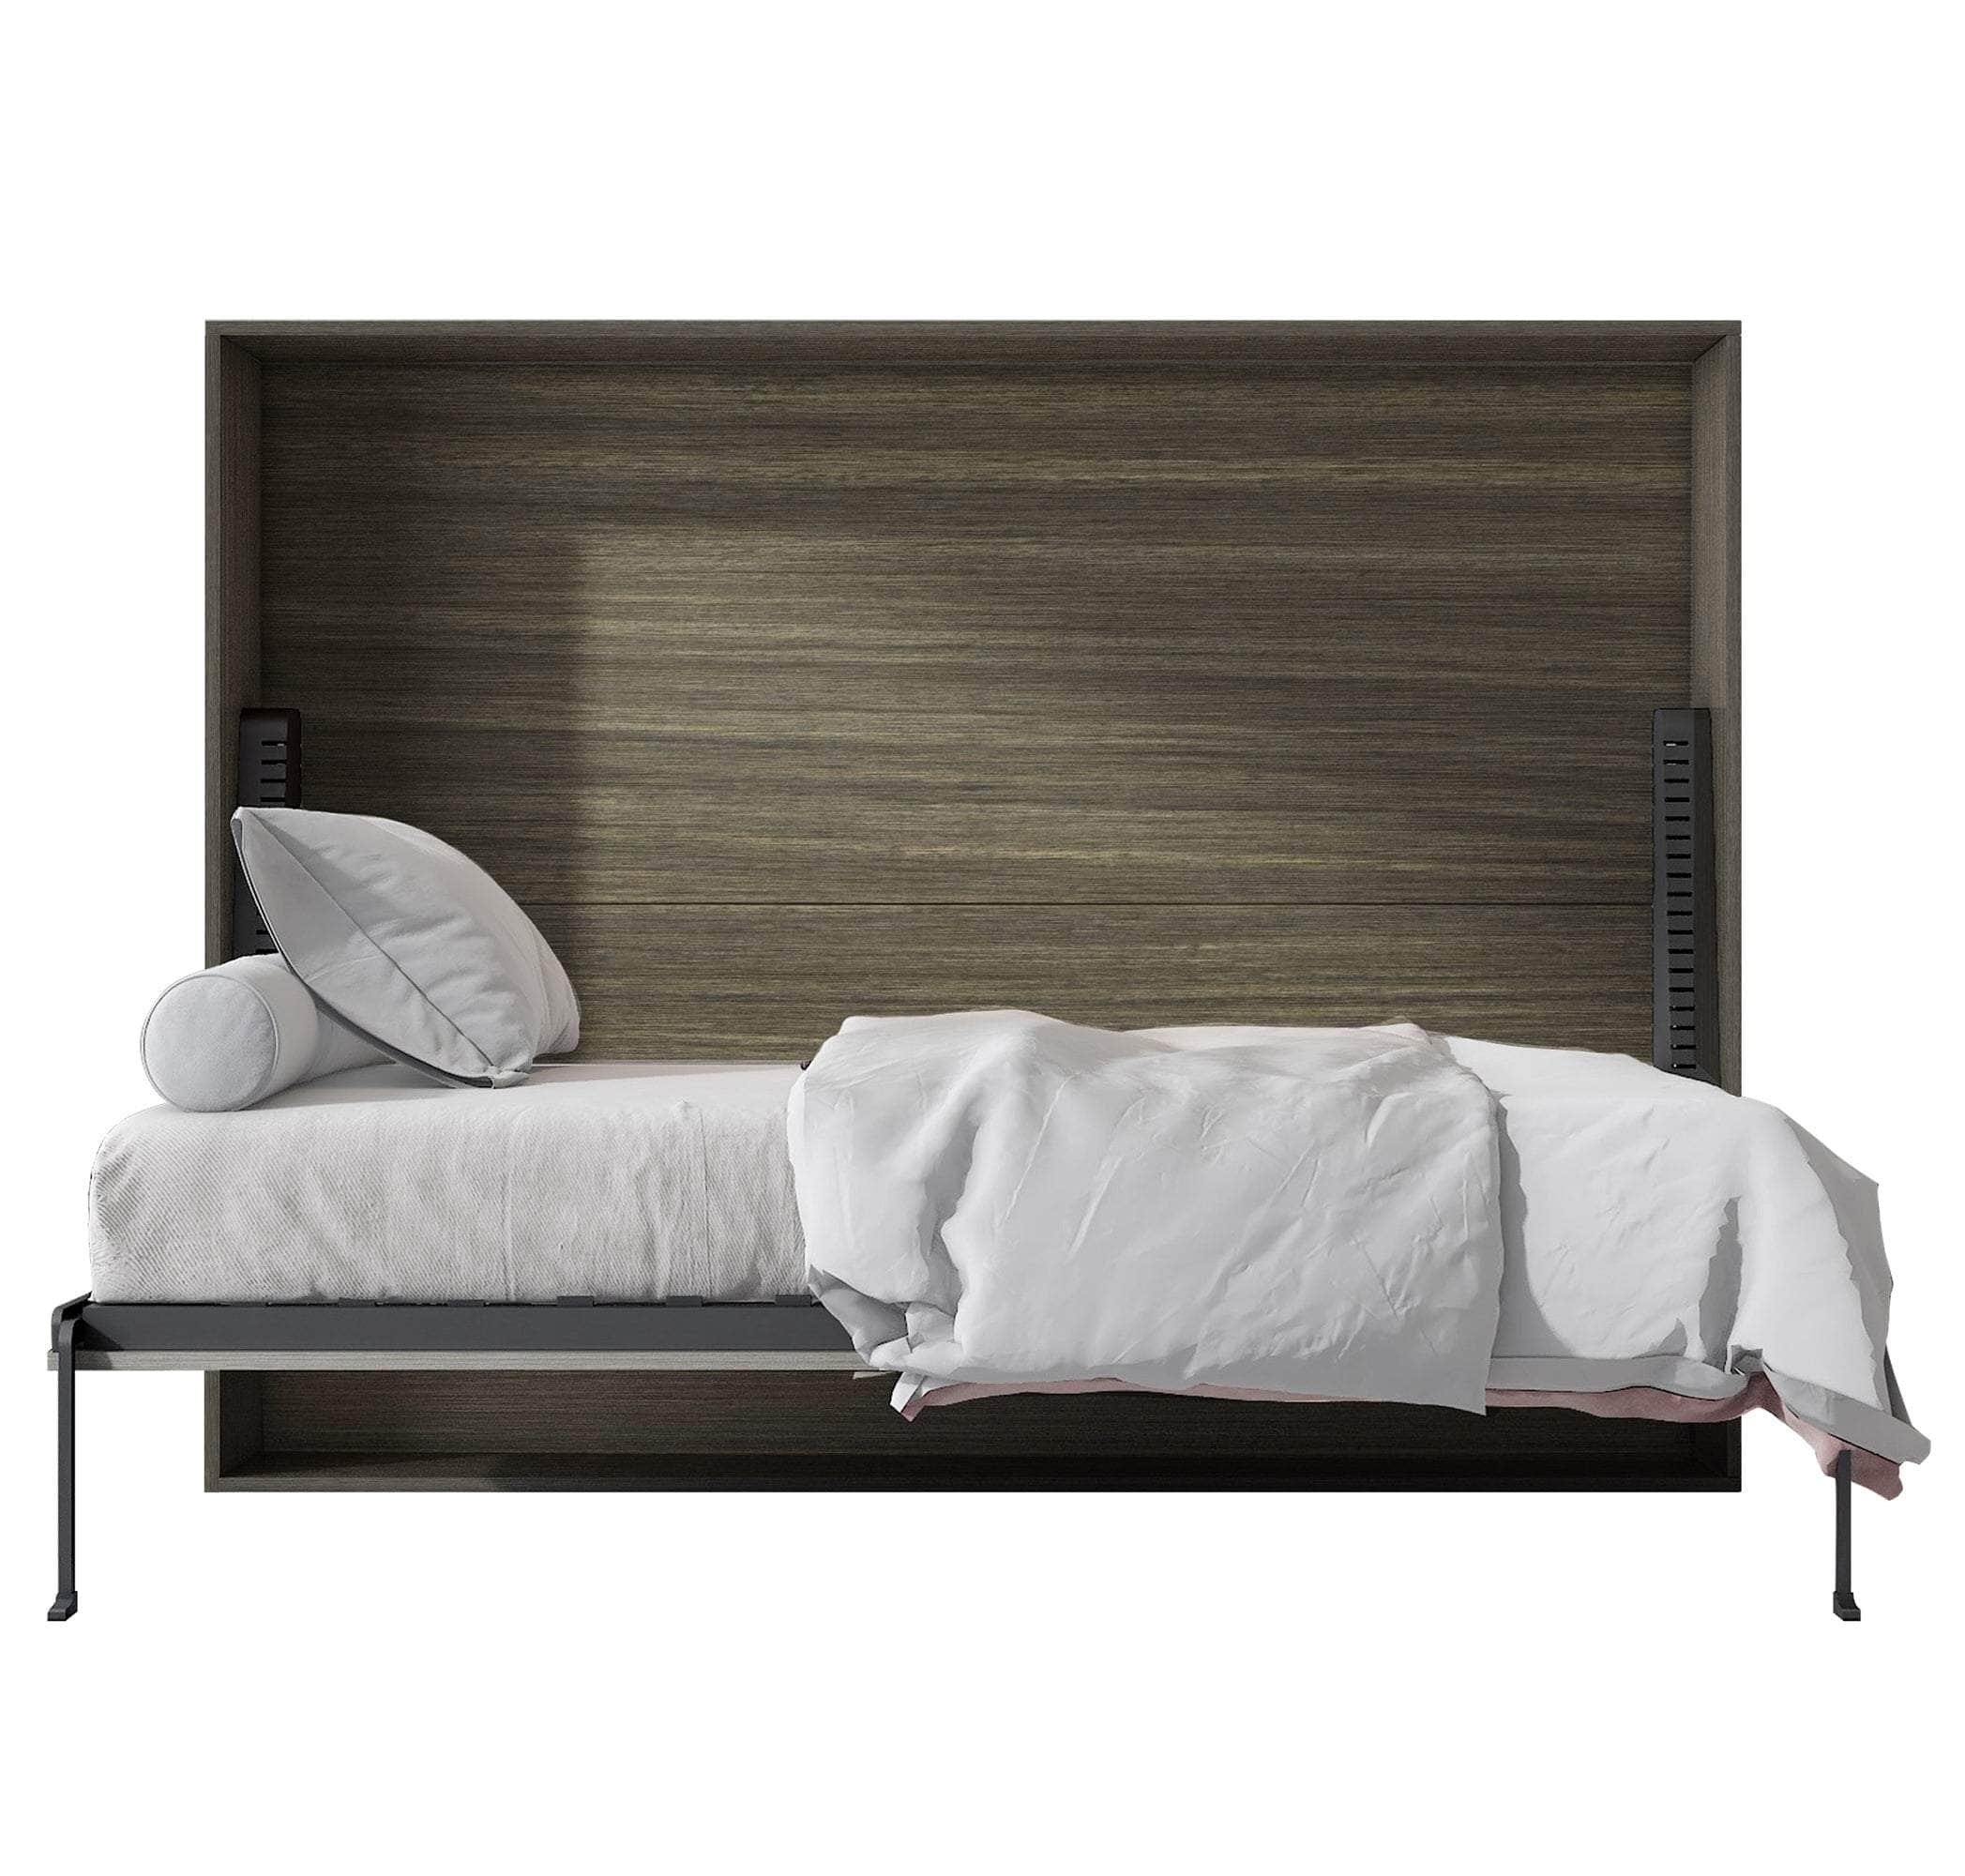 True Contemporary Murphy Wall Bed Twin Heidi II Brown Horizontal Murphy Wall Pull Down Bed - Available in 3 Sizes